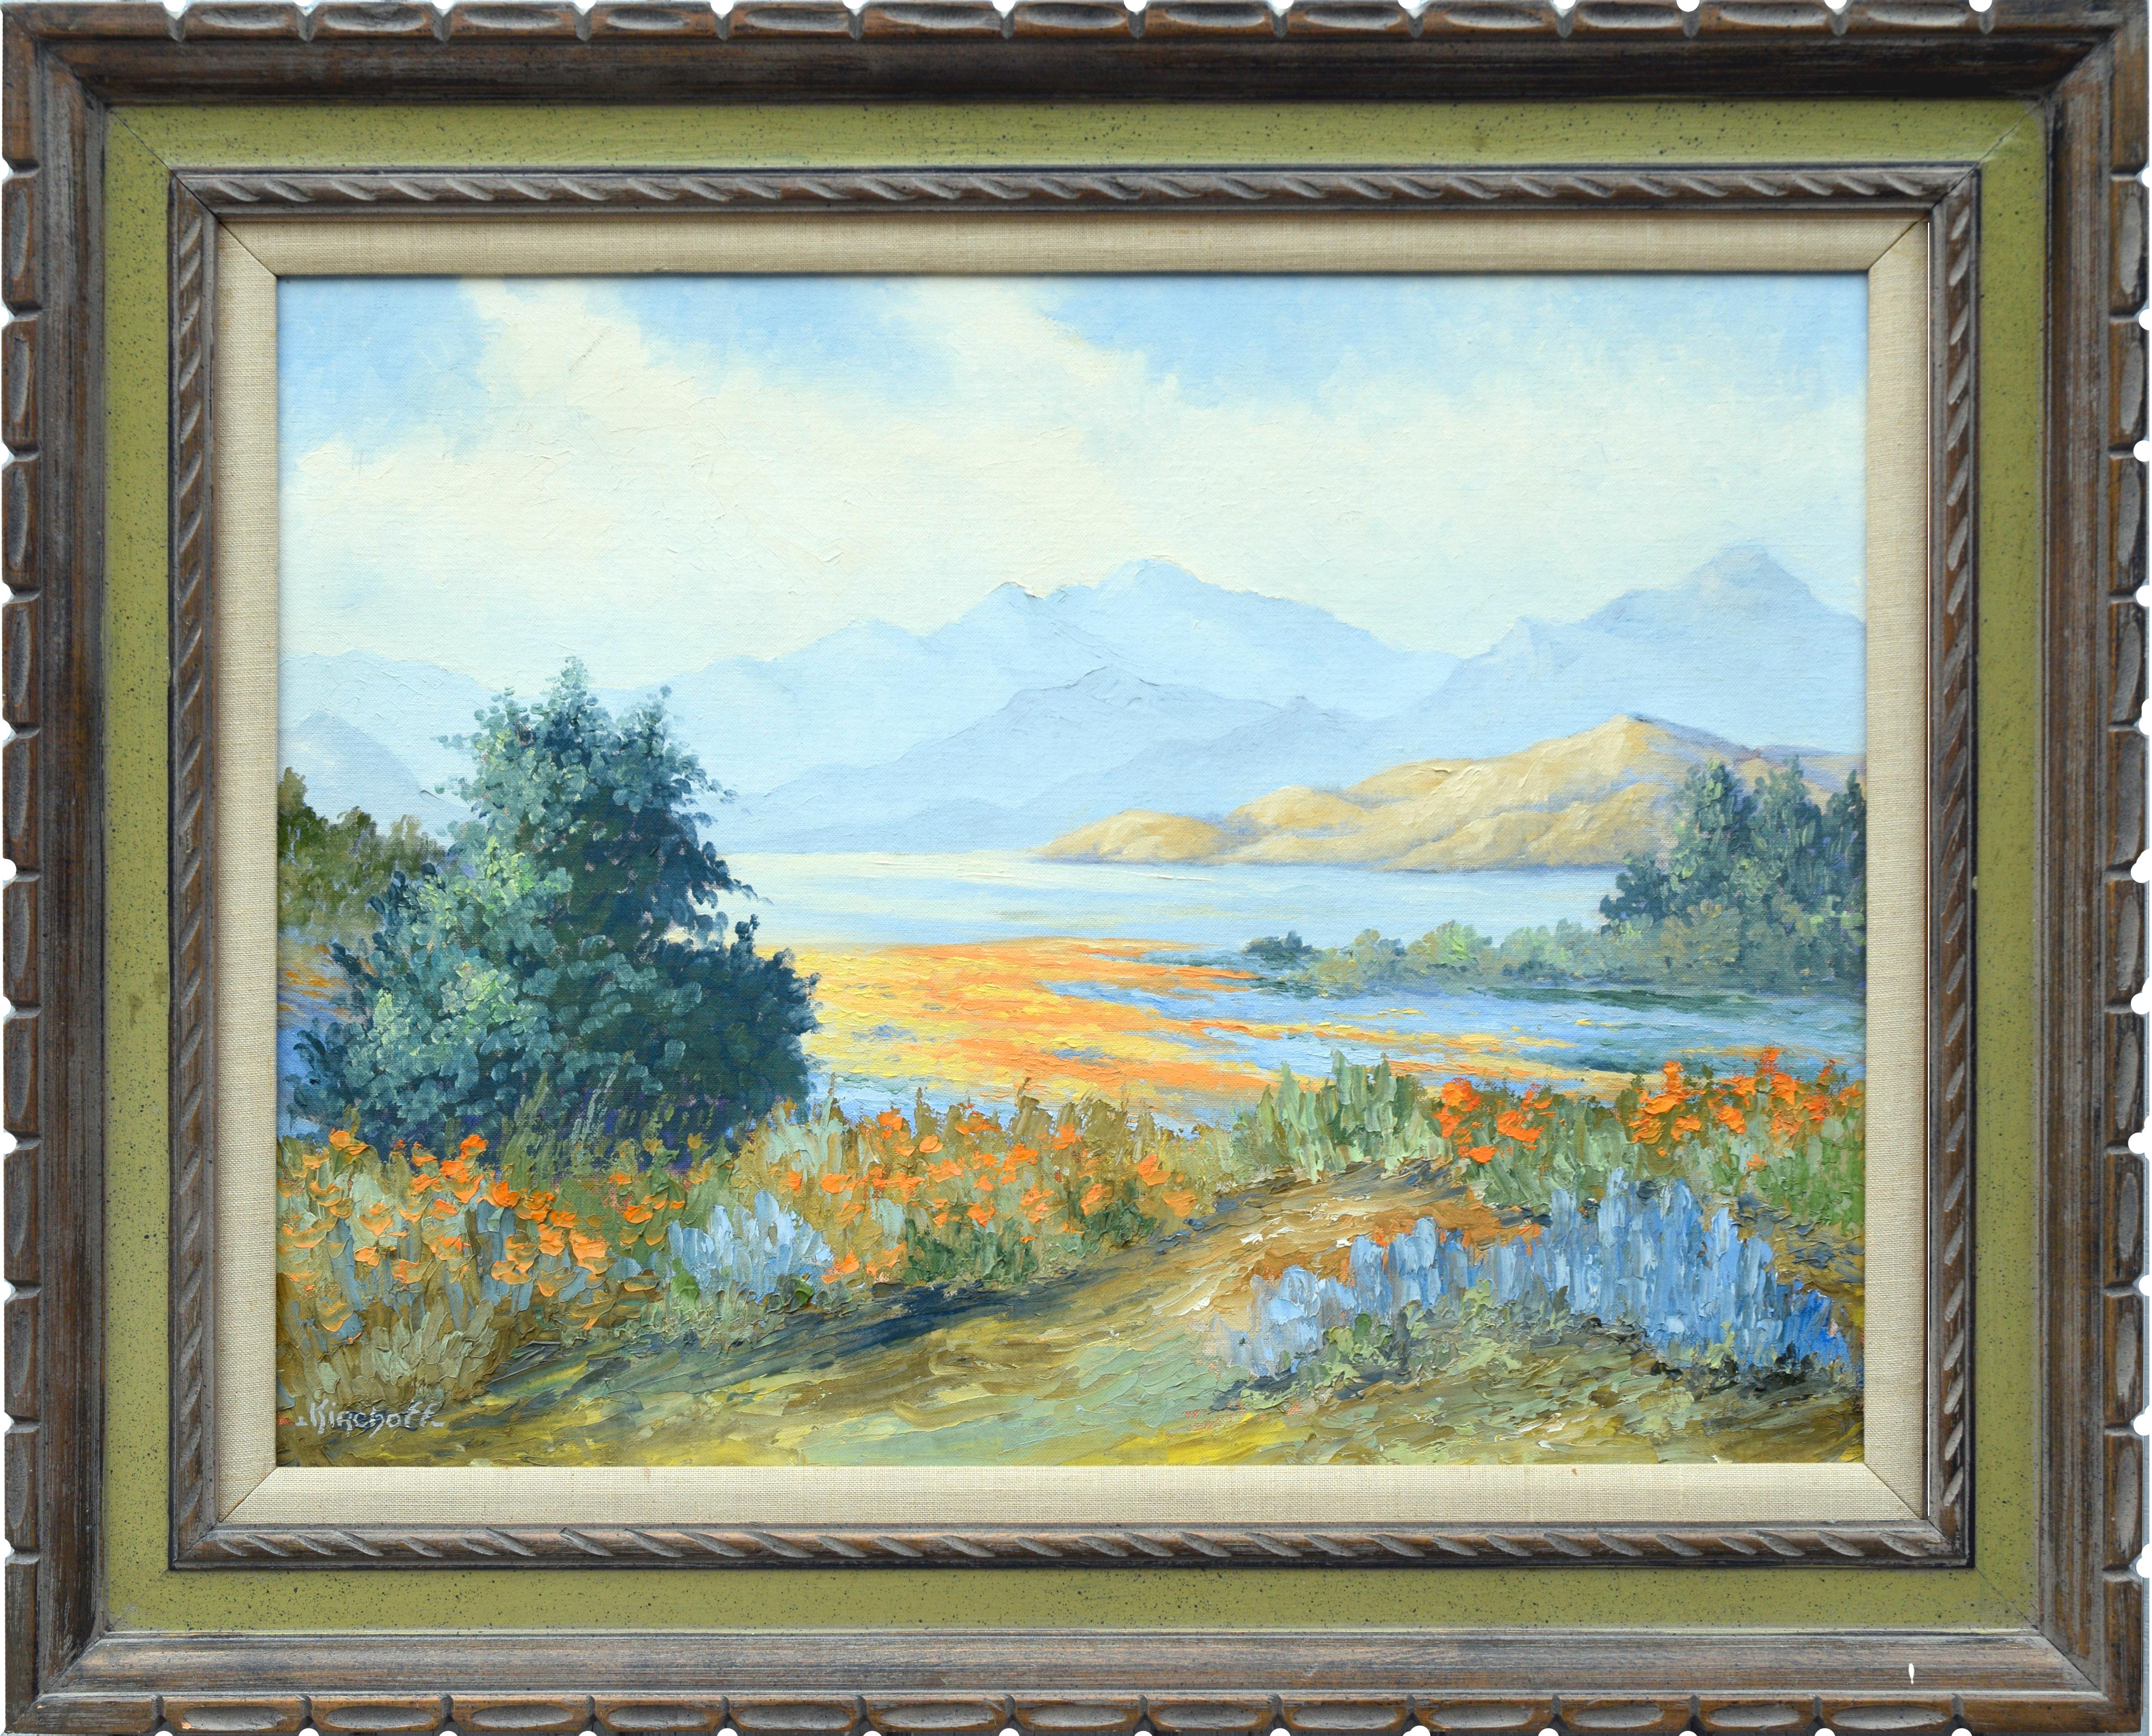 Loretta Adele Lee Kirchoff Landscape Painting - Mid Century California Lupines and Poppies Wildflower Landscape